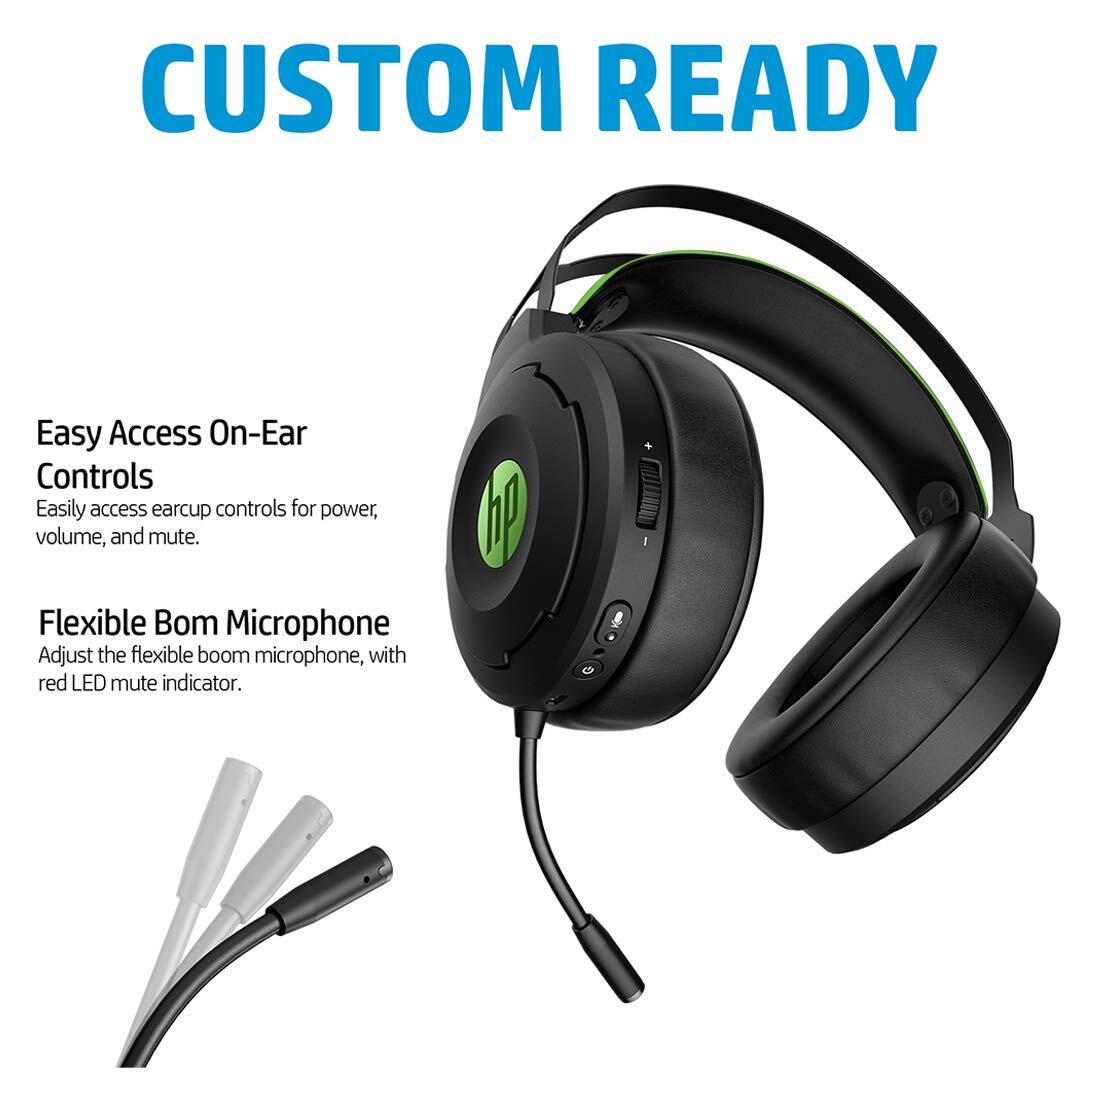 HP X1000 Wireless Gaming Headset with 7.1 Surround Sound and Flexible Boom Microphone